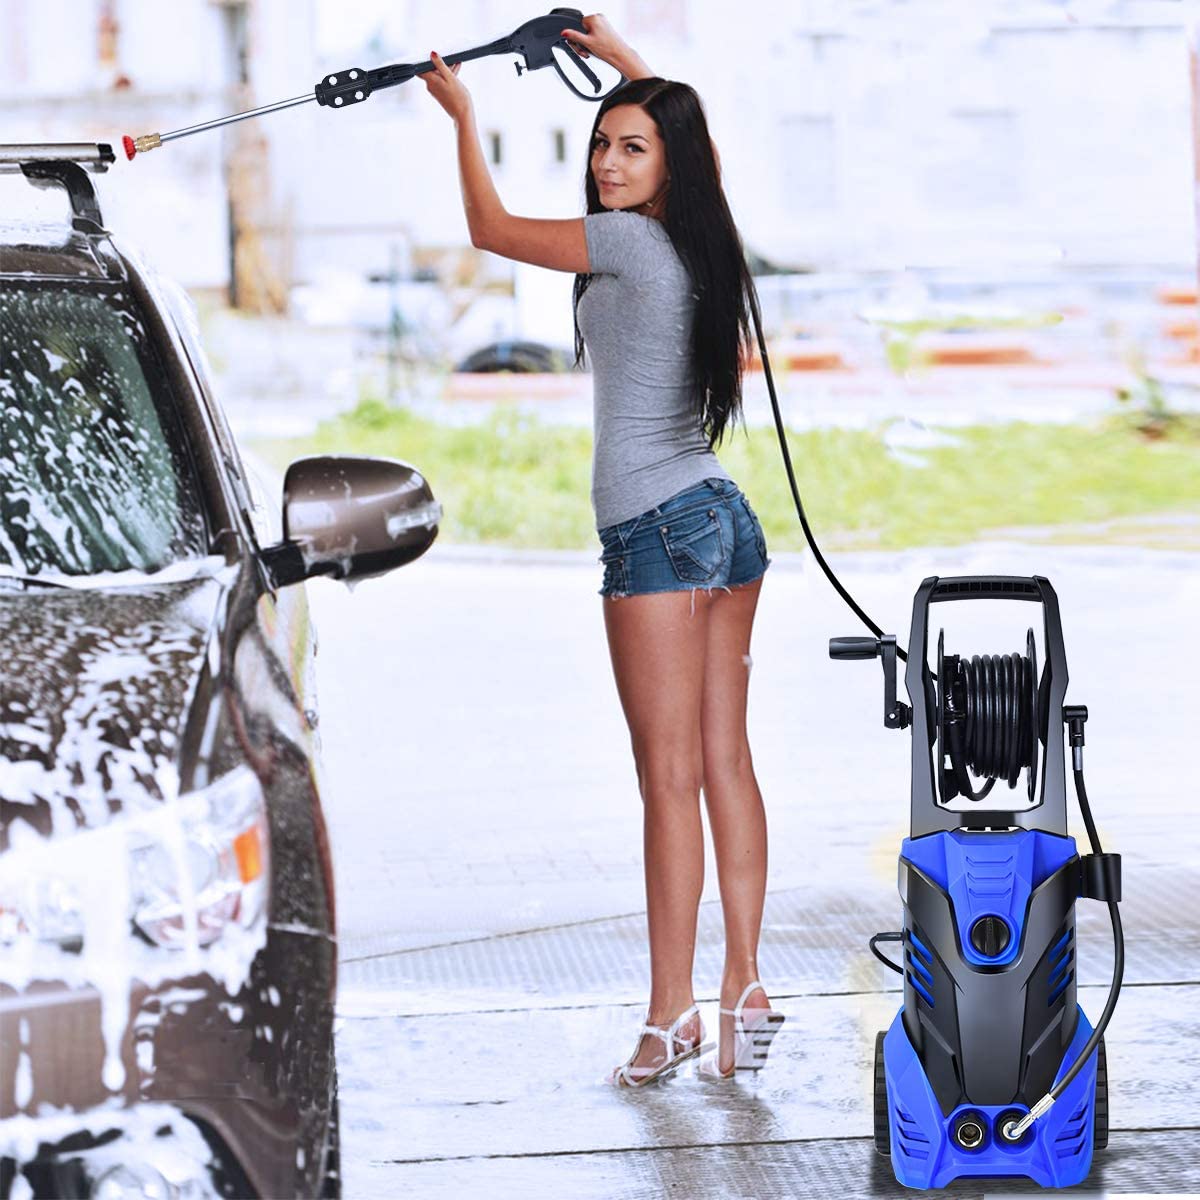 Chairliving 3000PSI Electric Pressure Washer 2.0 GPM Portable High Power Washer with 5 Nozzles and Hose Reel